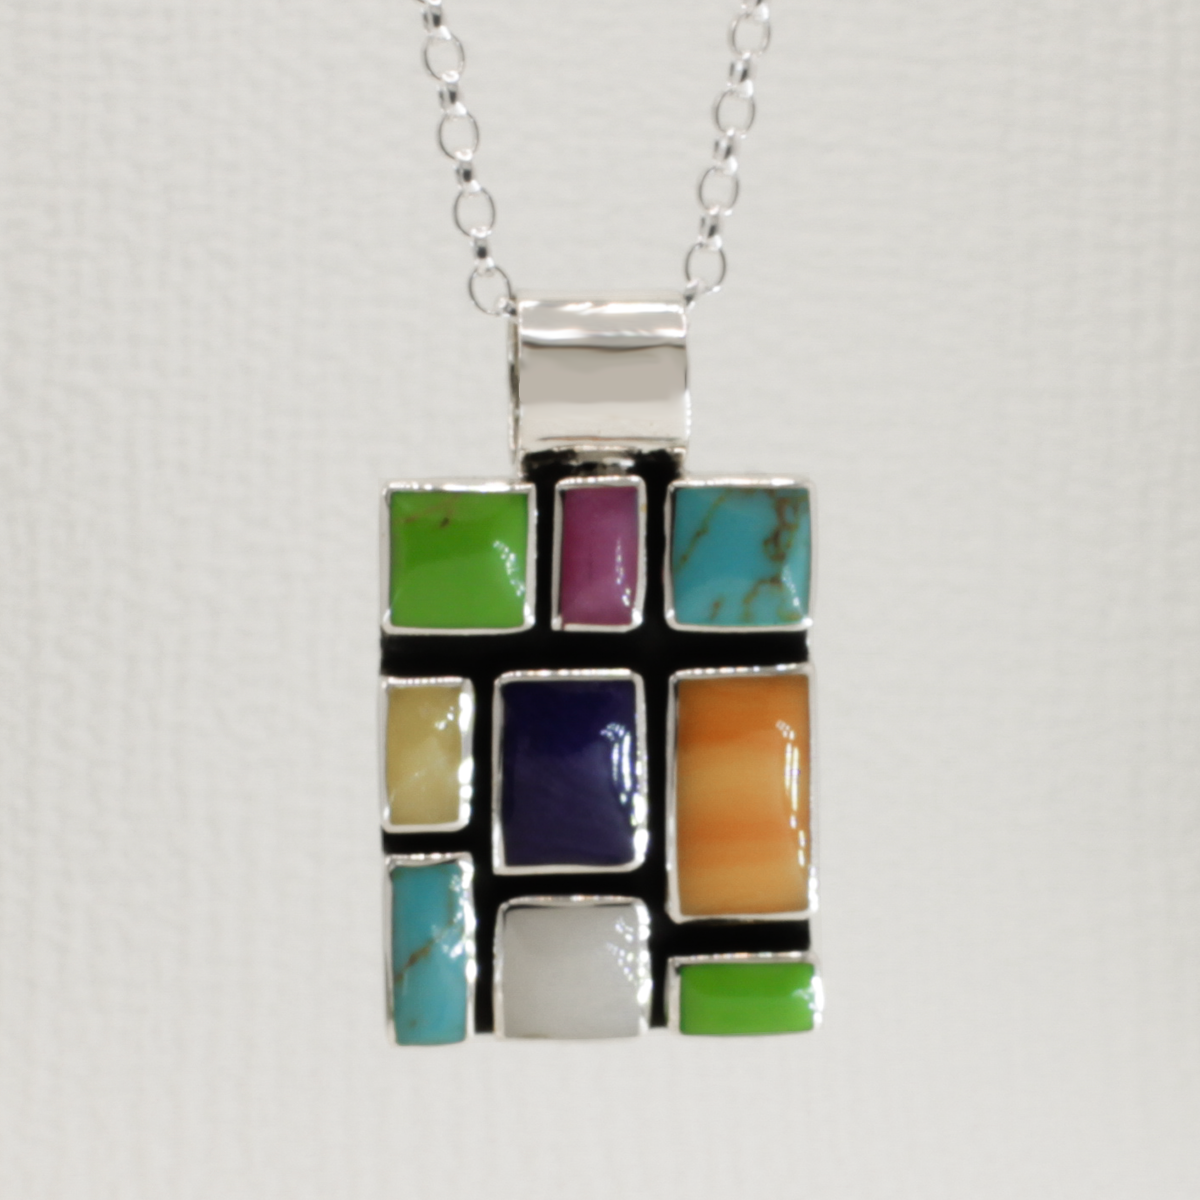 Sleveen's Rectangle With Multi-Coloured Mosaic Resin Silver Pendant is an exquisite piece of jewelry! Measuring 23mm in width, 30mm in length, and 3.5mm in depth, this pendant stands 40mm tall from its top bail for a truly impressive look. Crafted with .925 sterling silver, its bail can accommodate a chain up to 8mm, and comes with an adjustable 2.5mm silver roll chain that extends from 16" to 18".